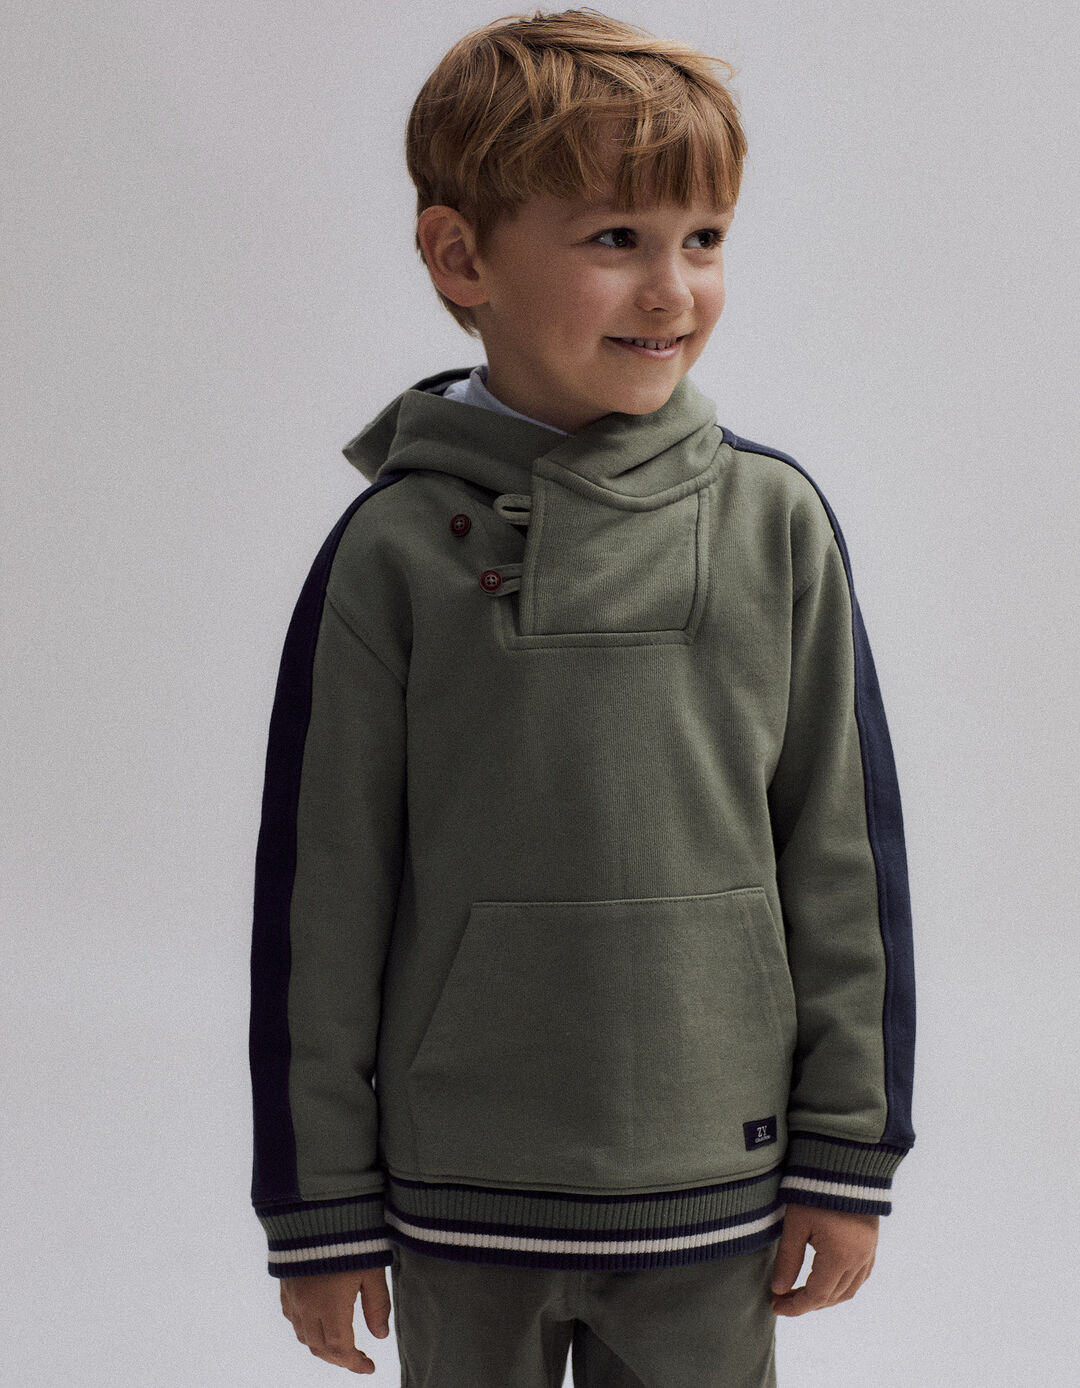 Hooded Cotton Jumper for Boys, Green